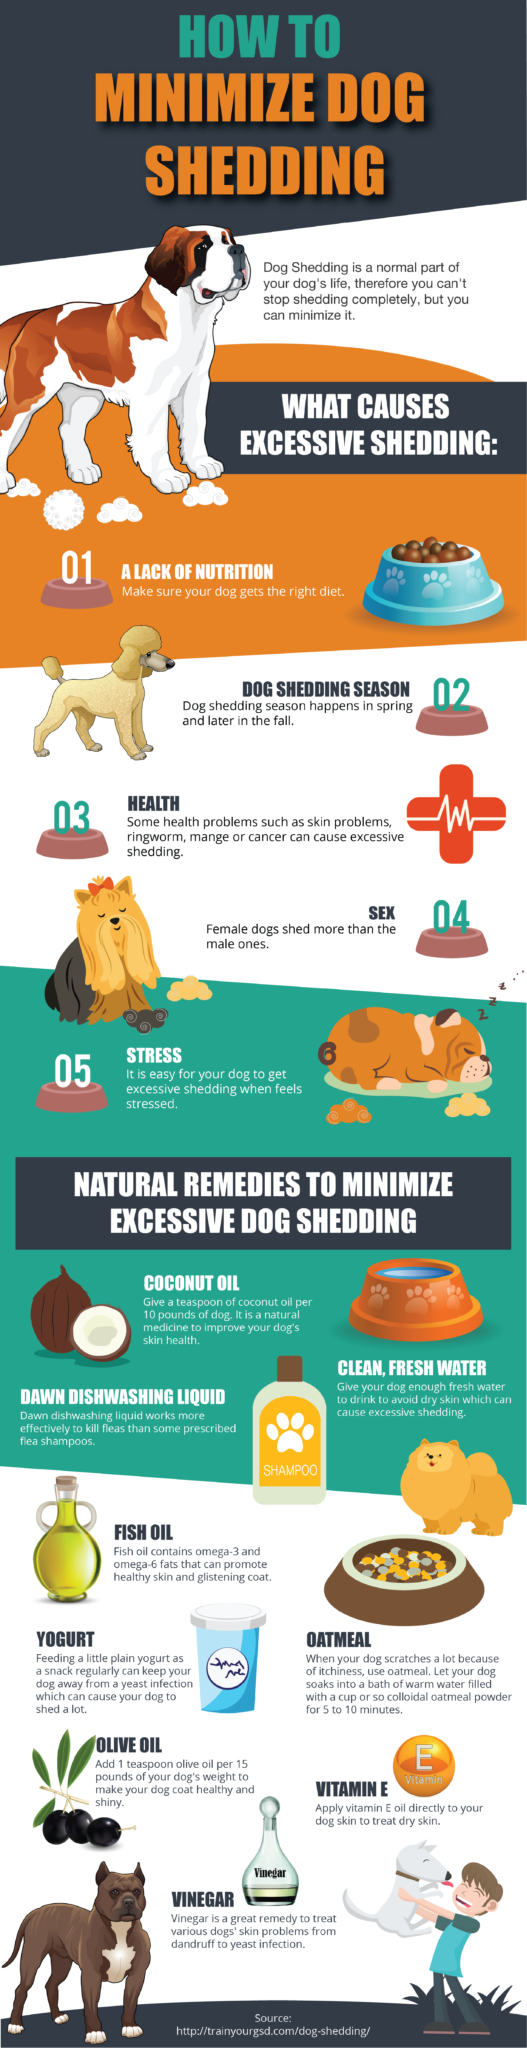 How_to_Minimize_Dog_Shedding01 (3).png